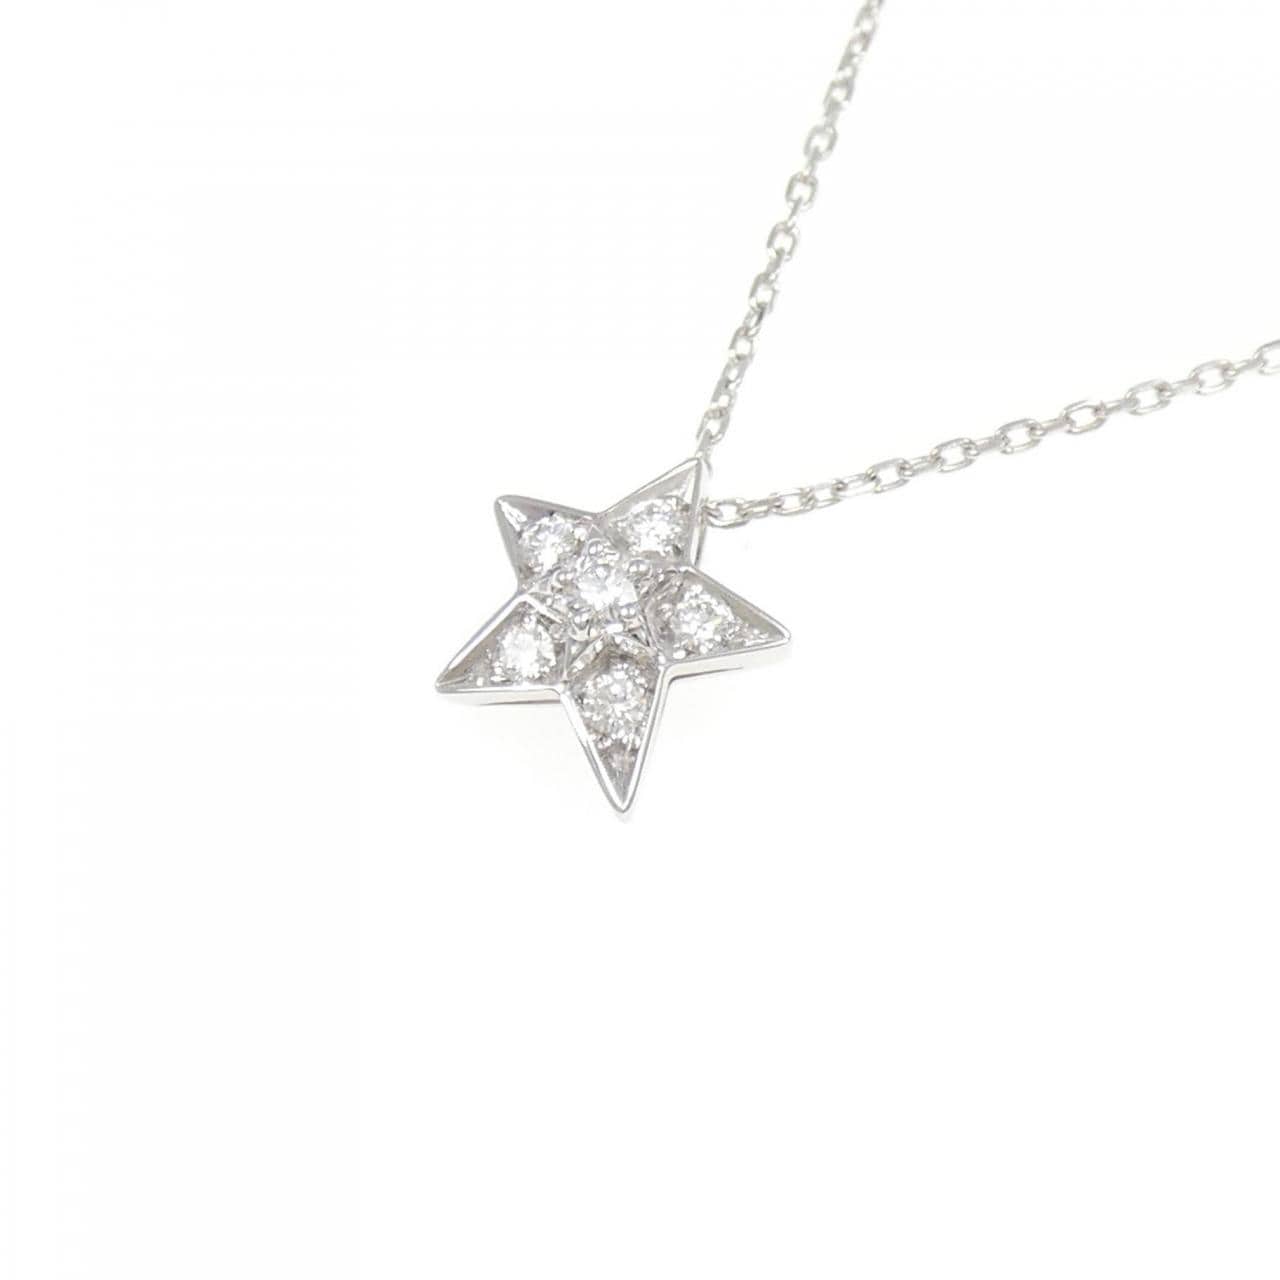 CHANEL comet small necklace